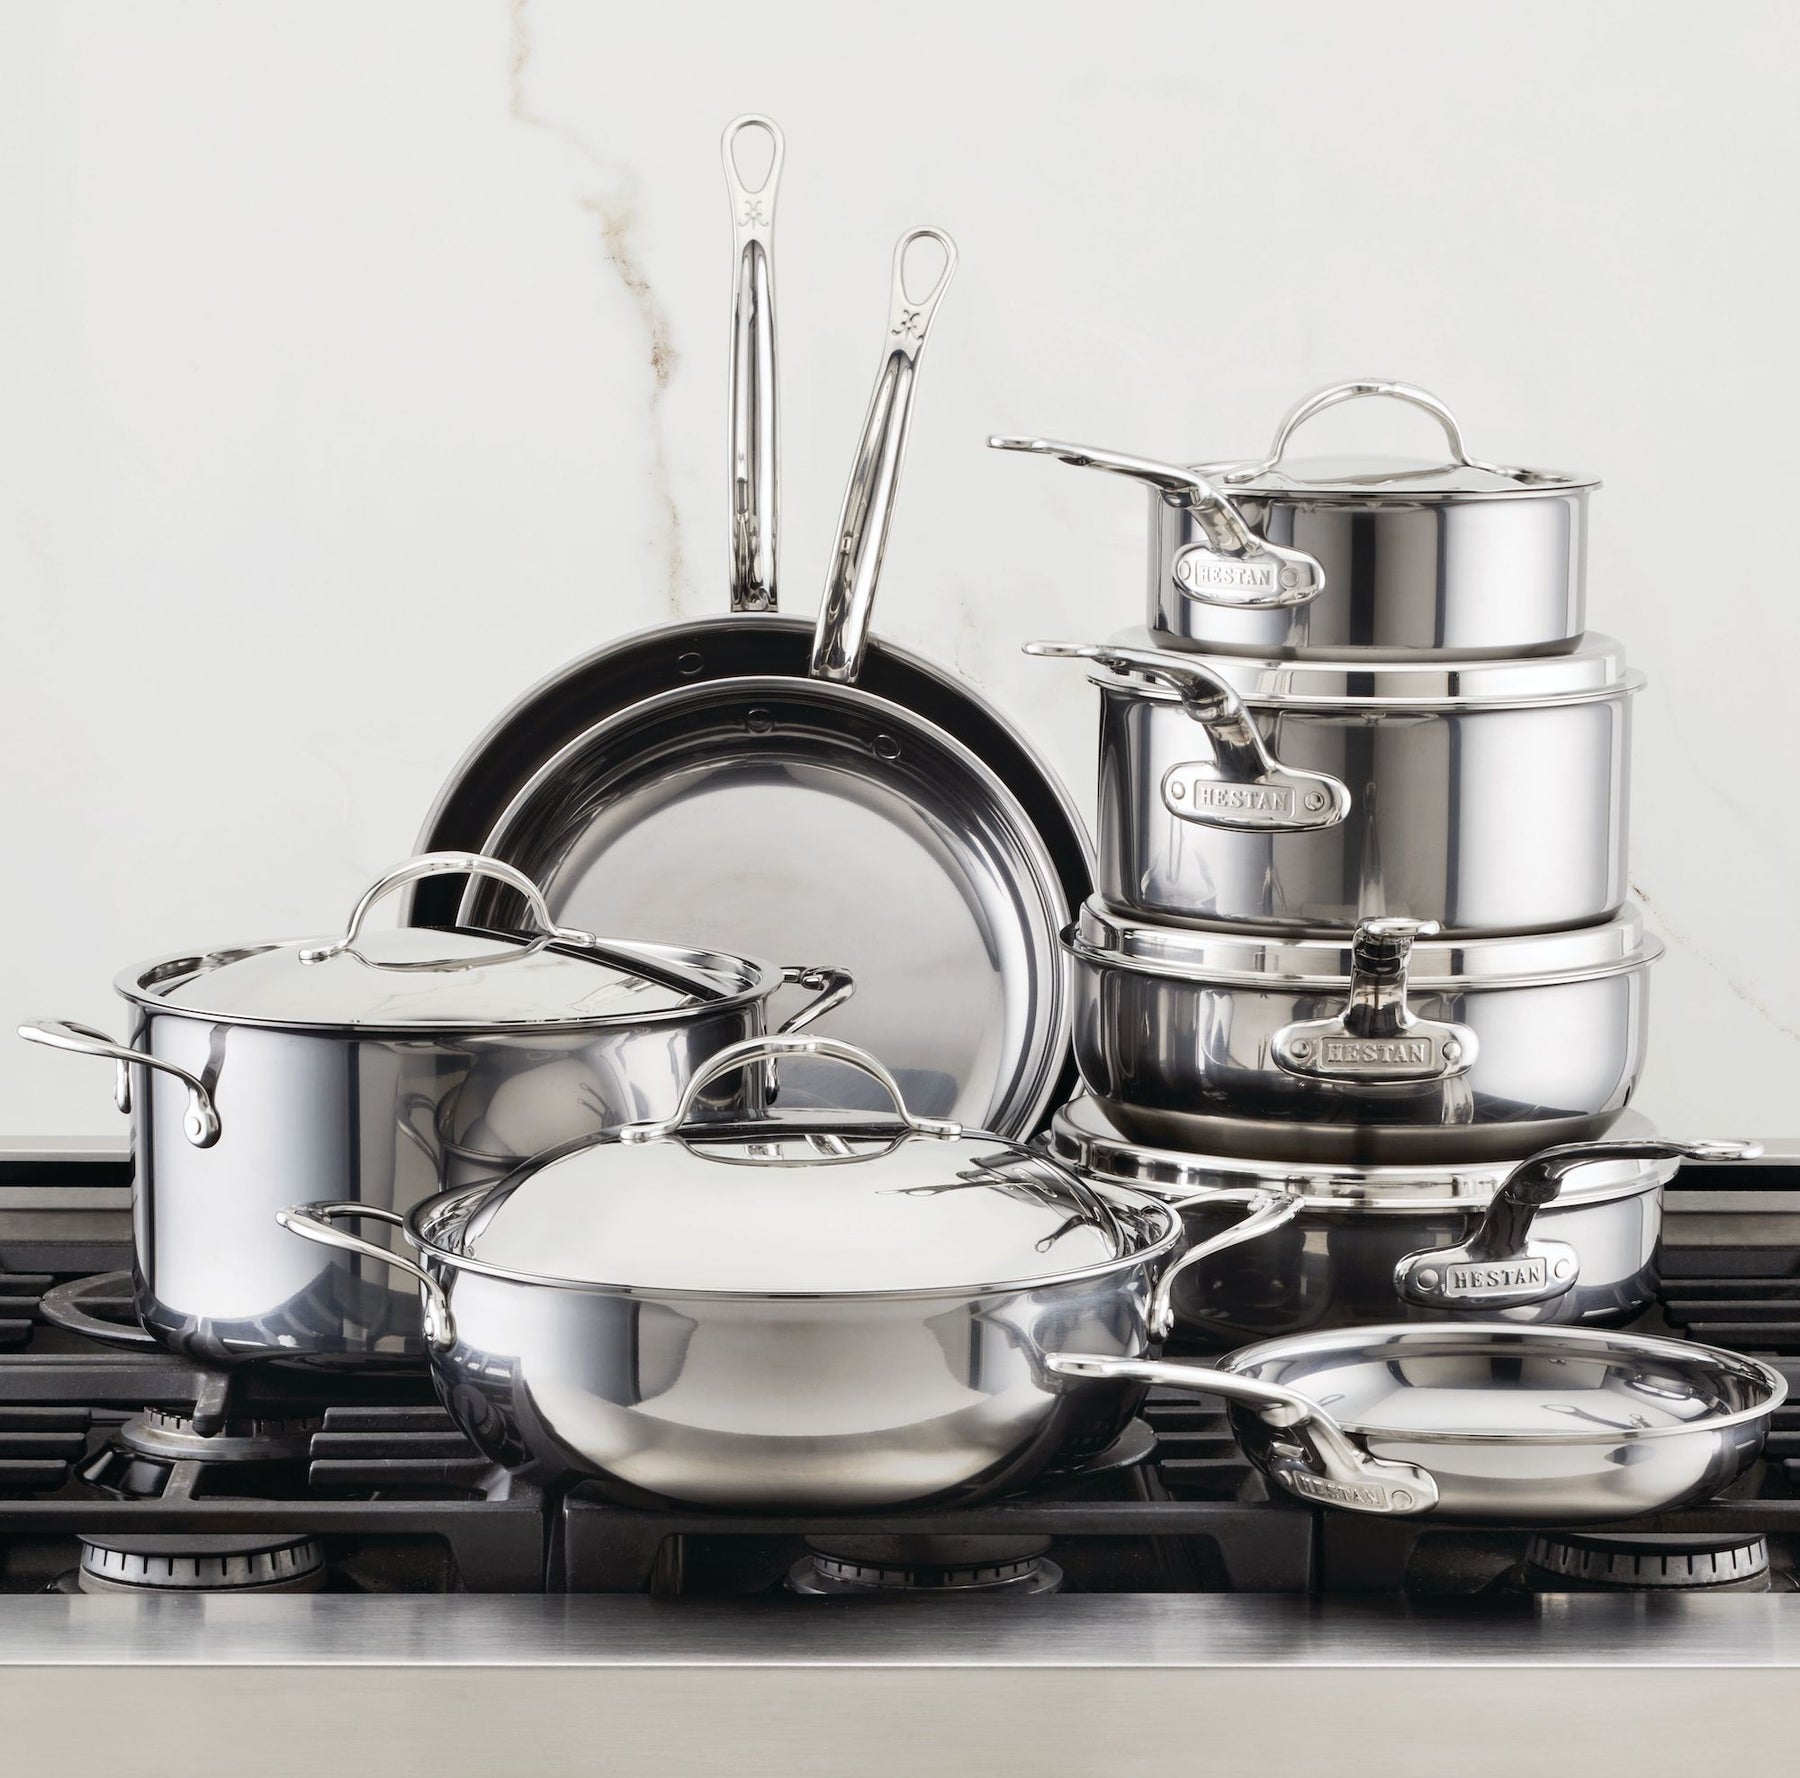 14-Piece Stainless Steel Assorted Cookware set with Glass Lids